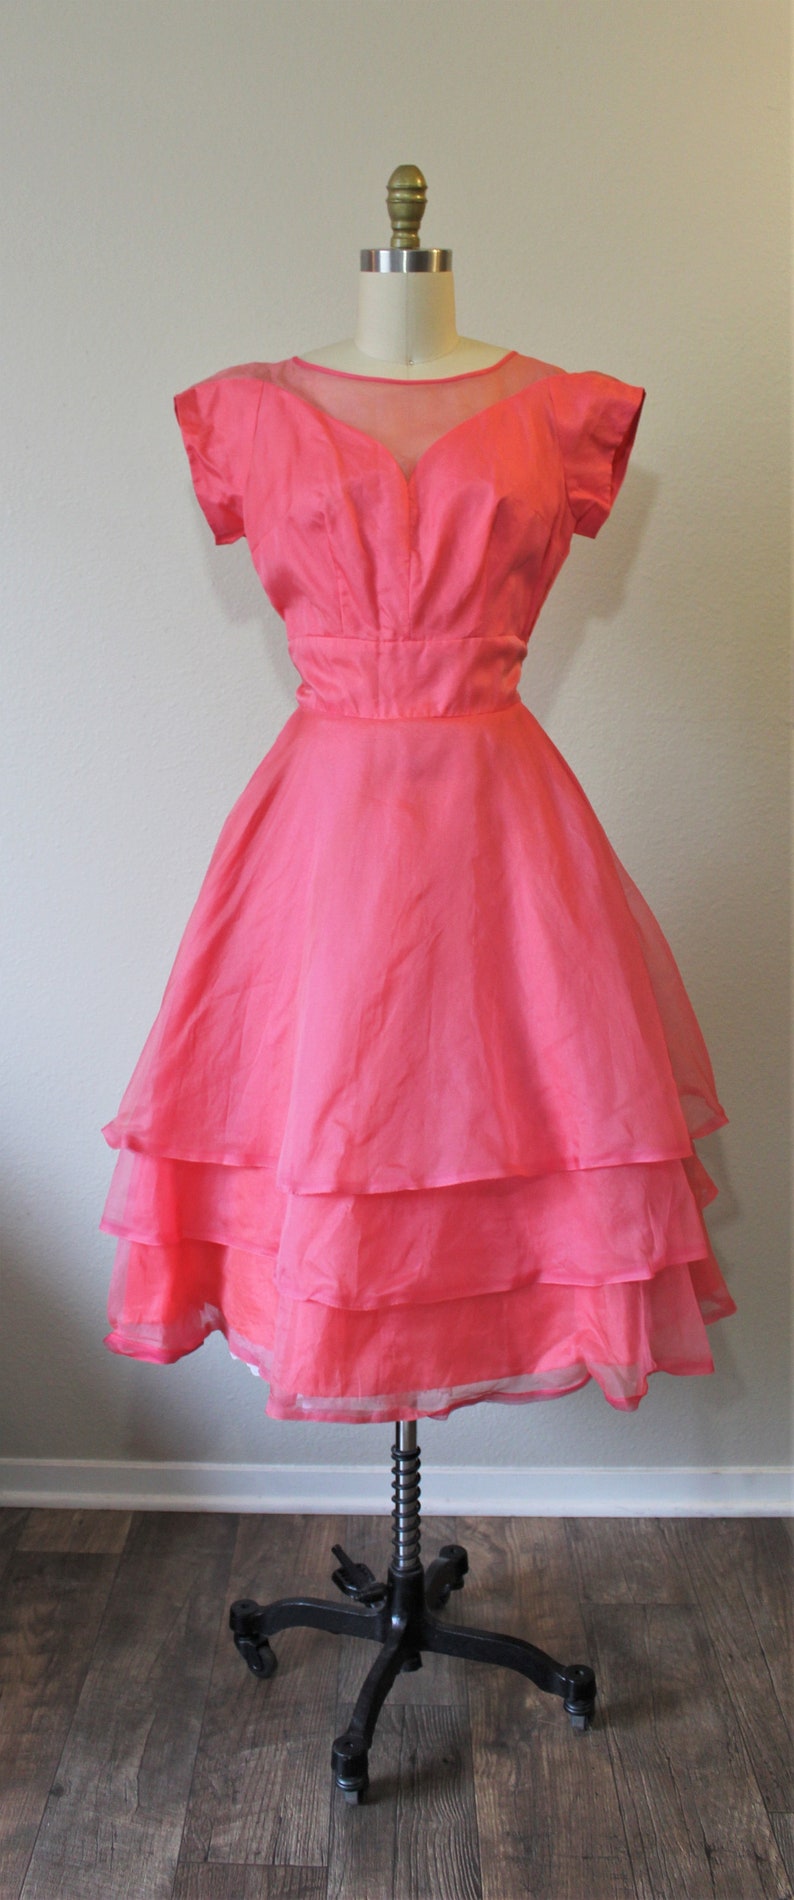 1950s Prom Dress KERRYBROOKE / Vintage 50s NOS Pink SILK Organza Party Prom Dress Event // Modern Size 2 4 xs Small image 3